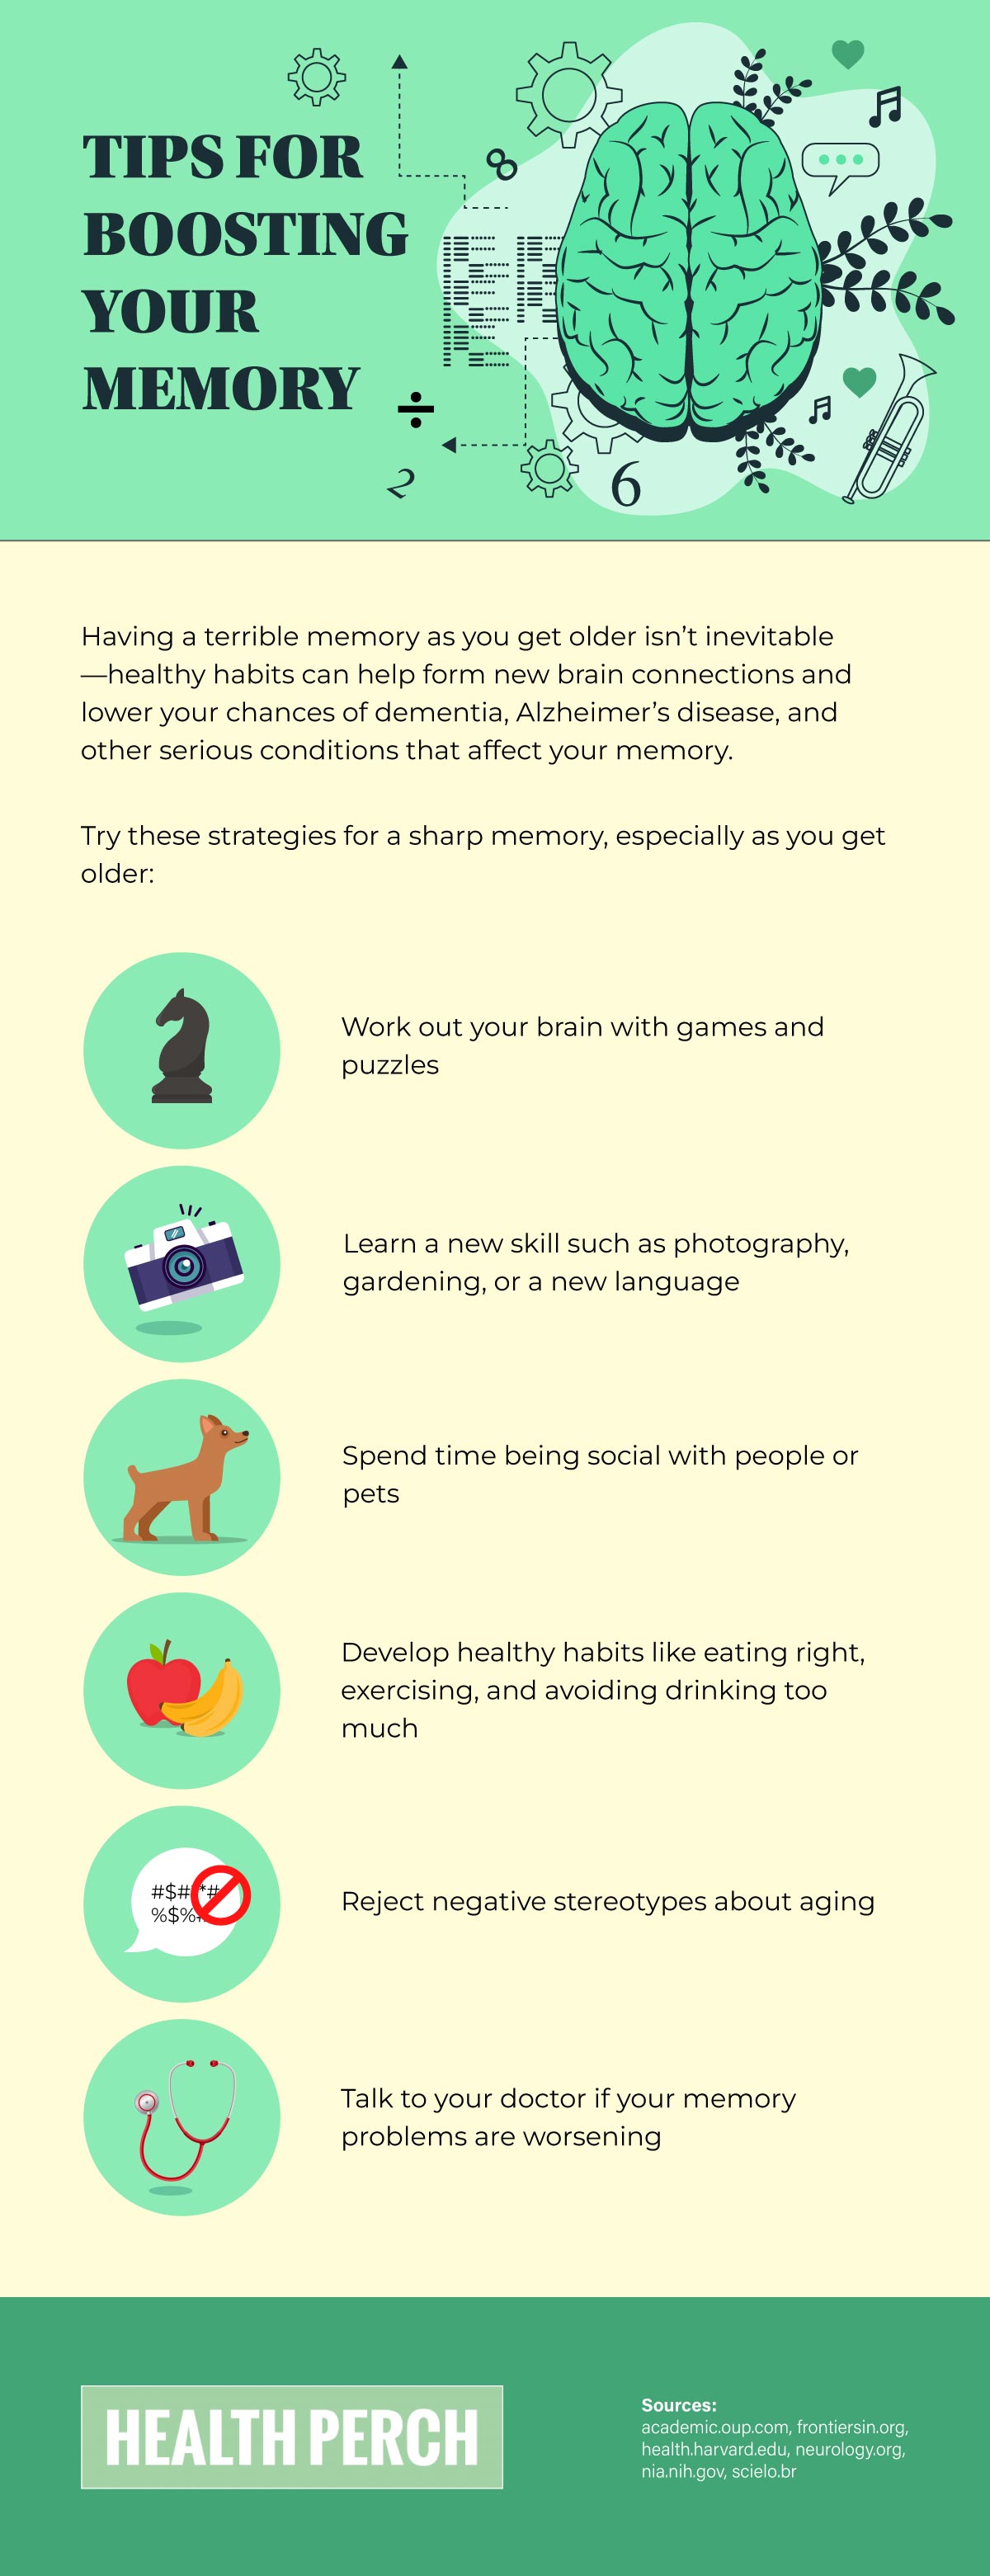 Tips for boosting your memory